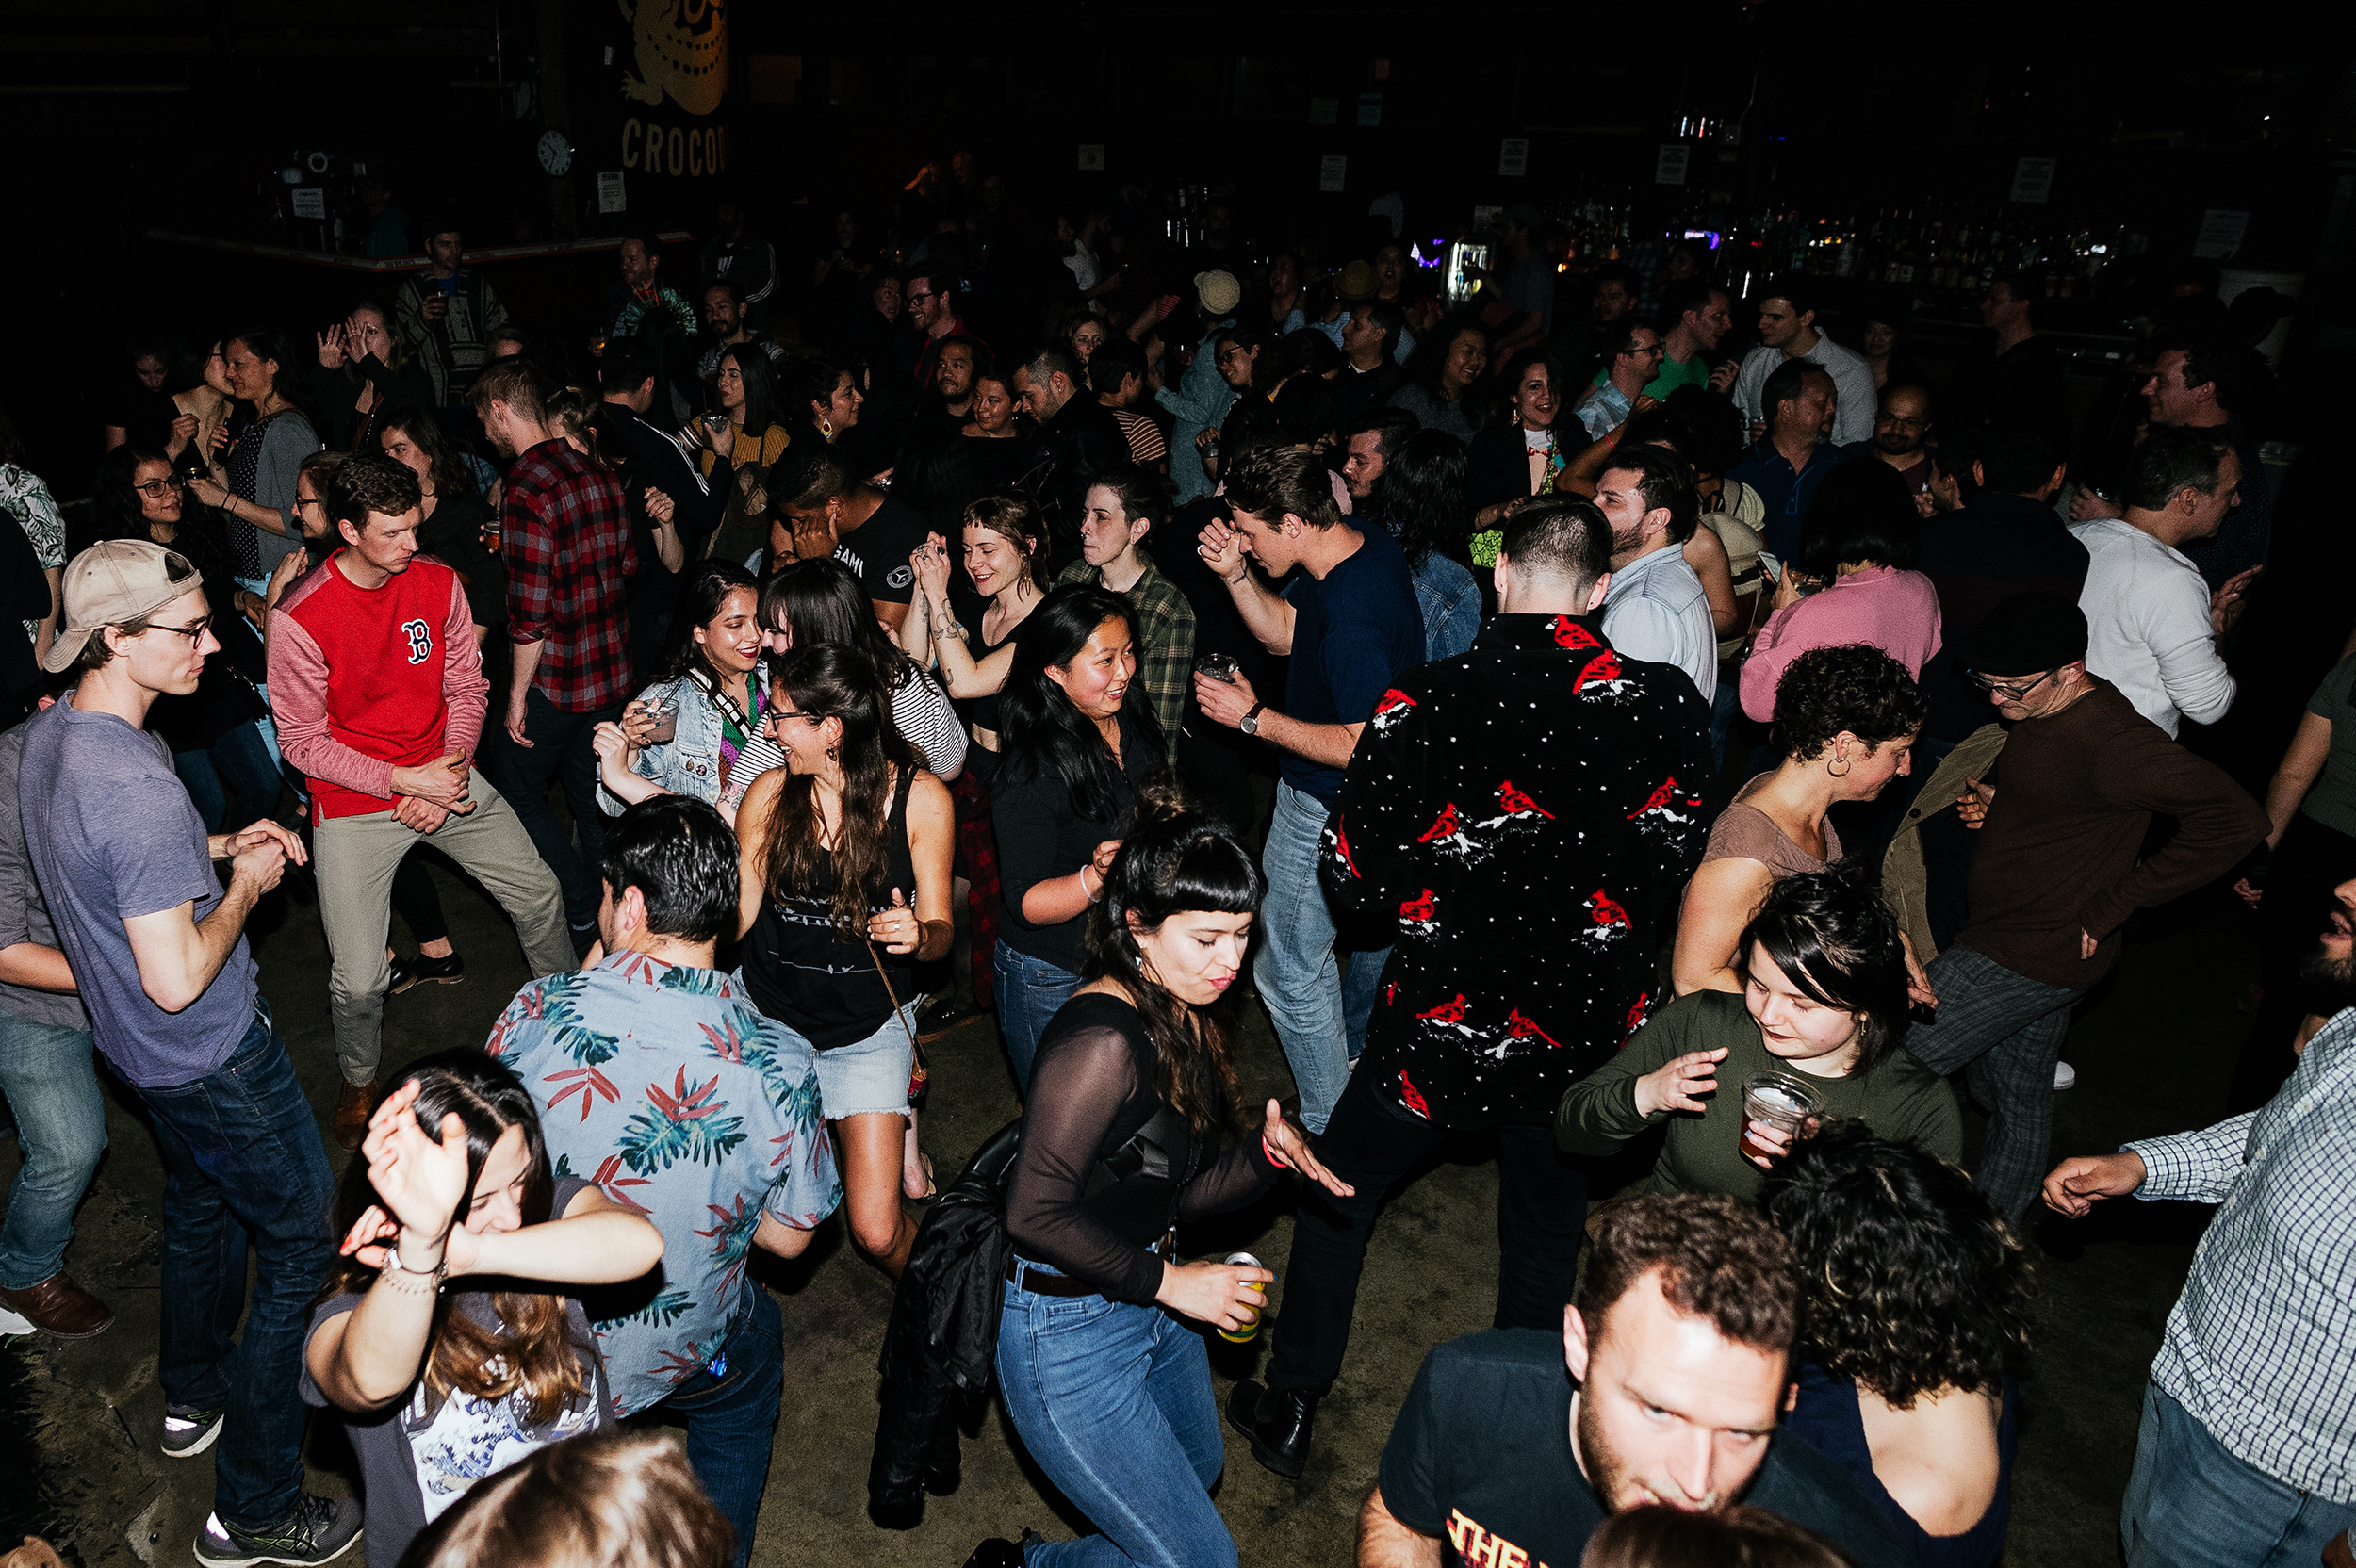 Electropika 2.0 brought in a packed house to The Crocodile's main room on March 29 2019. Celebrating cumbia and other Latin American musical styles, the event aimed to share and grow the relevance of modern Latin music.  (Photo by Caean Couto)